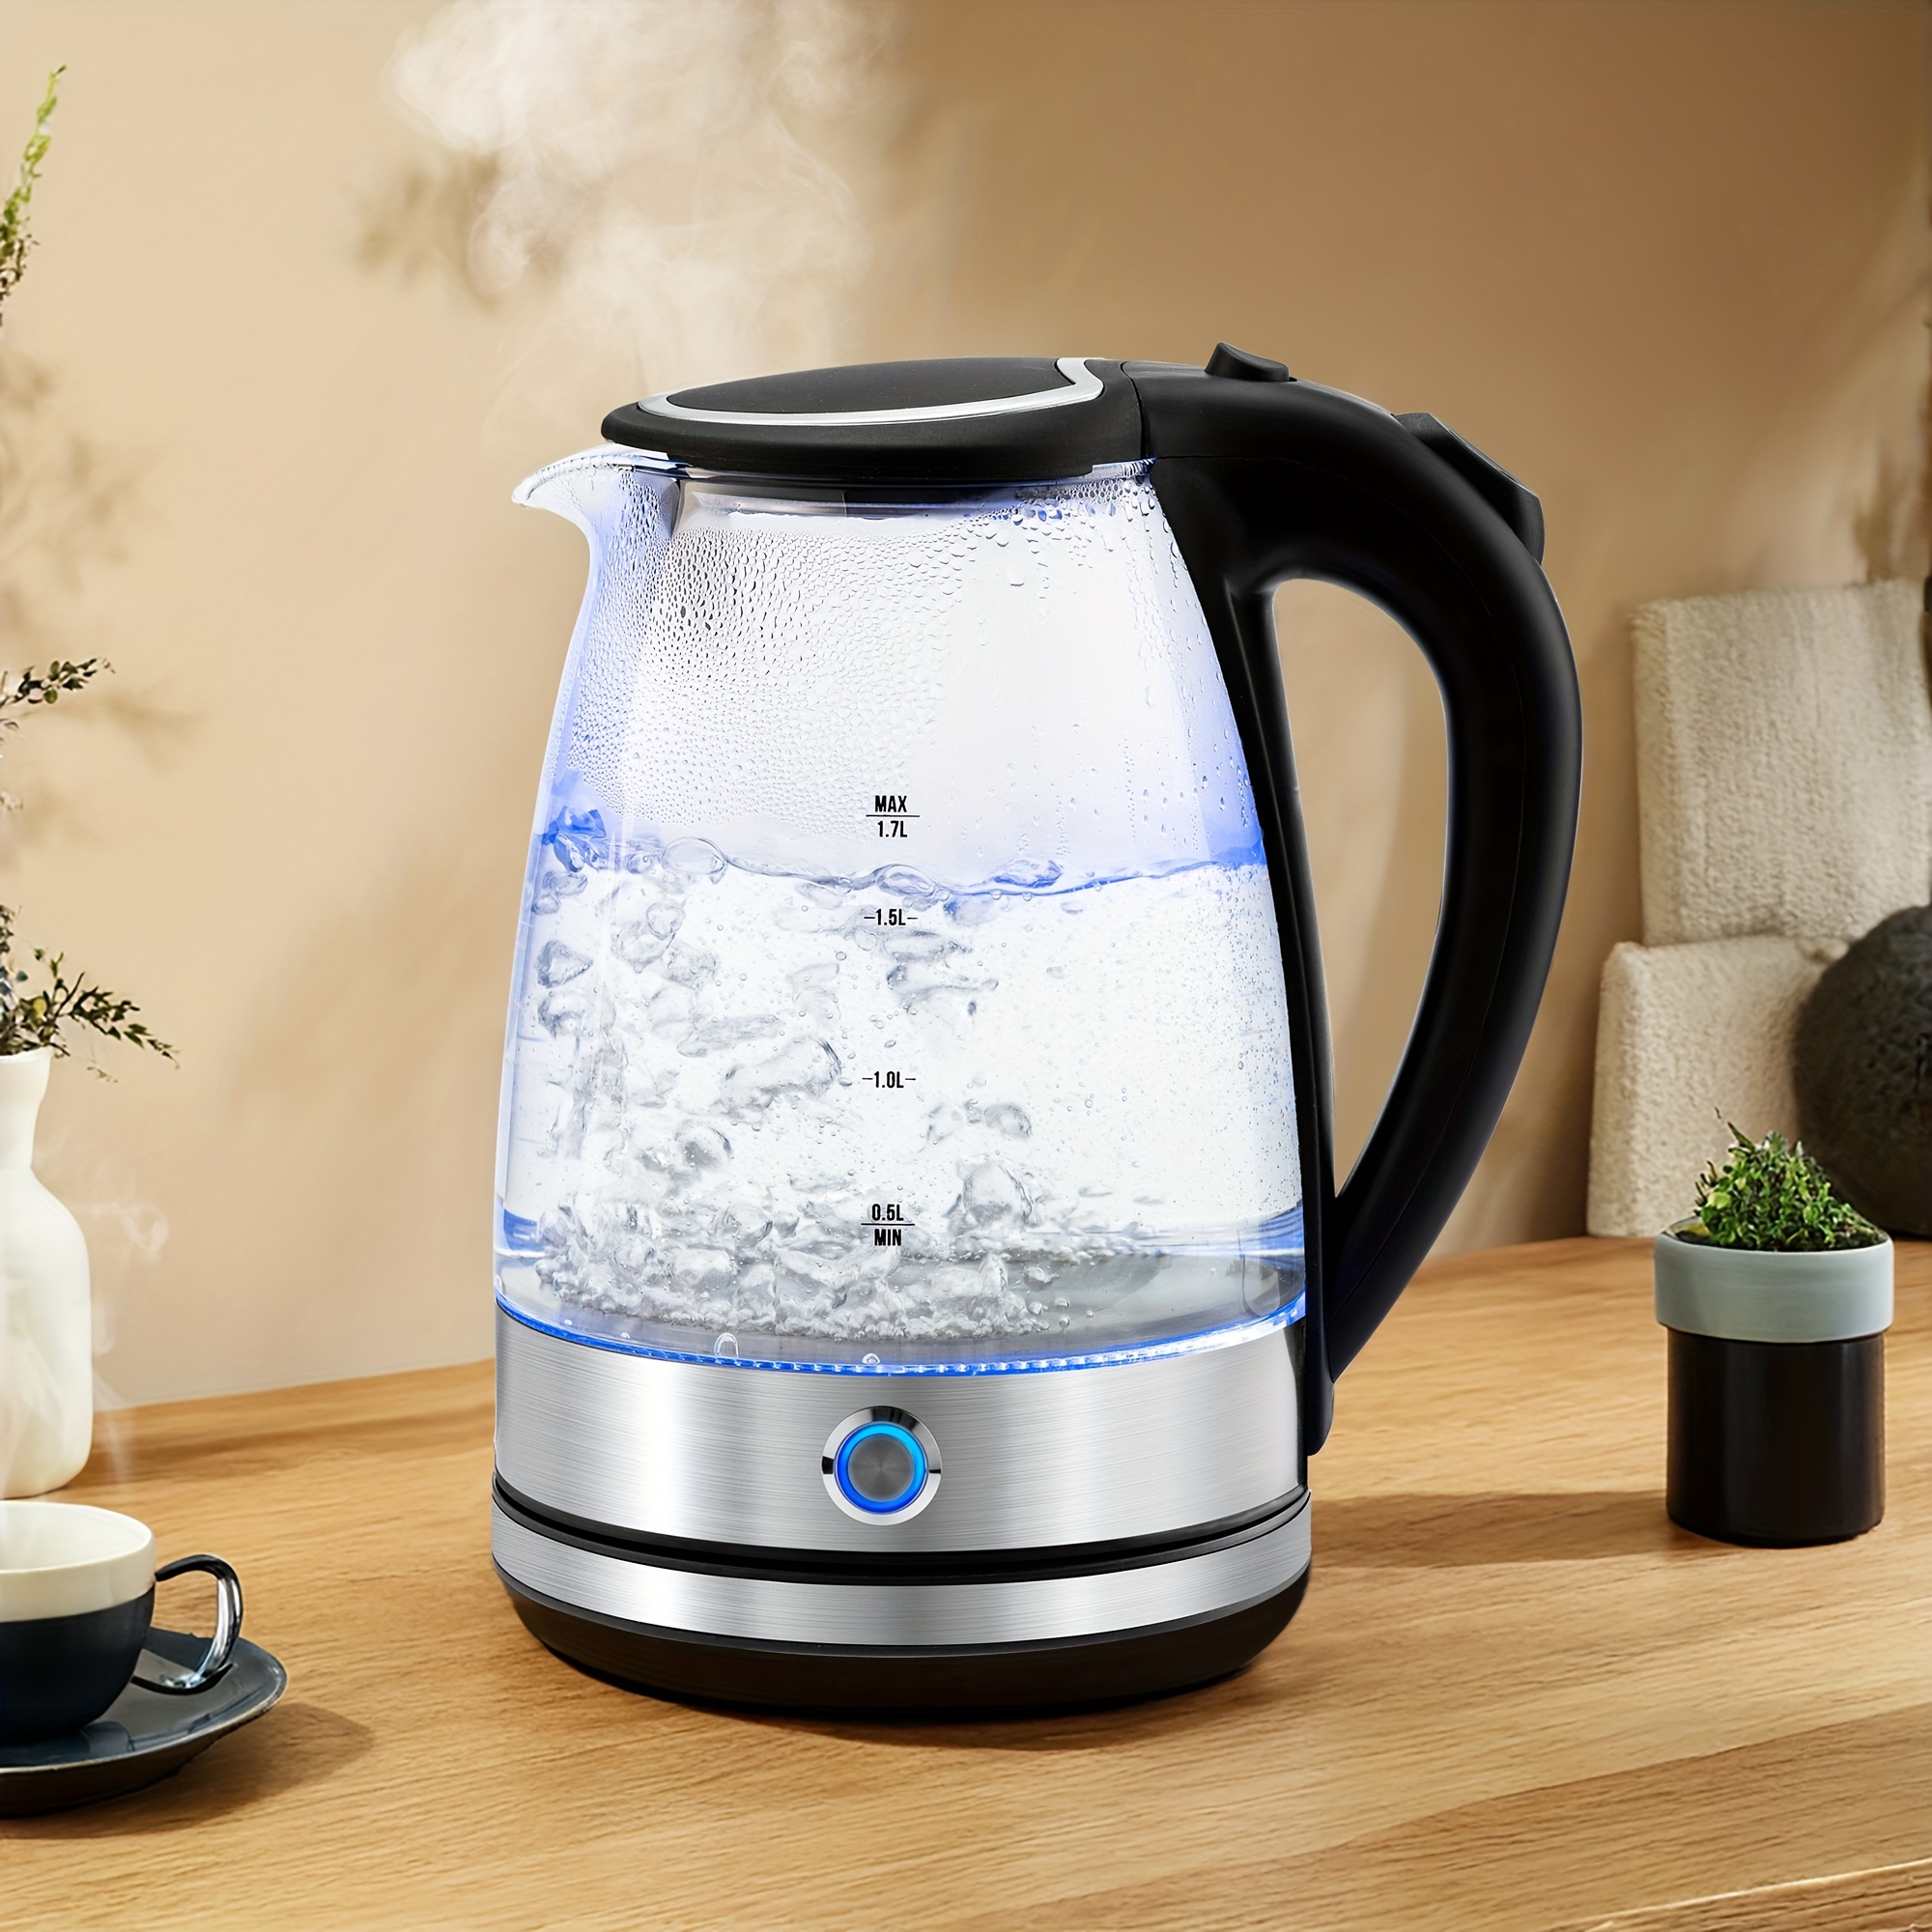 

Susteas Electric Kettle, 1.7l Capacity, Made Of Bpa-free High Borosilicate Glass, Easy To Use And Safe, With Automatic Shutdown Function